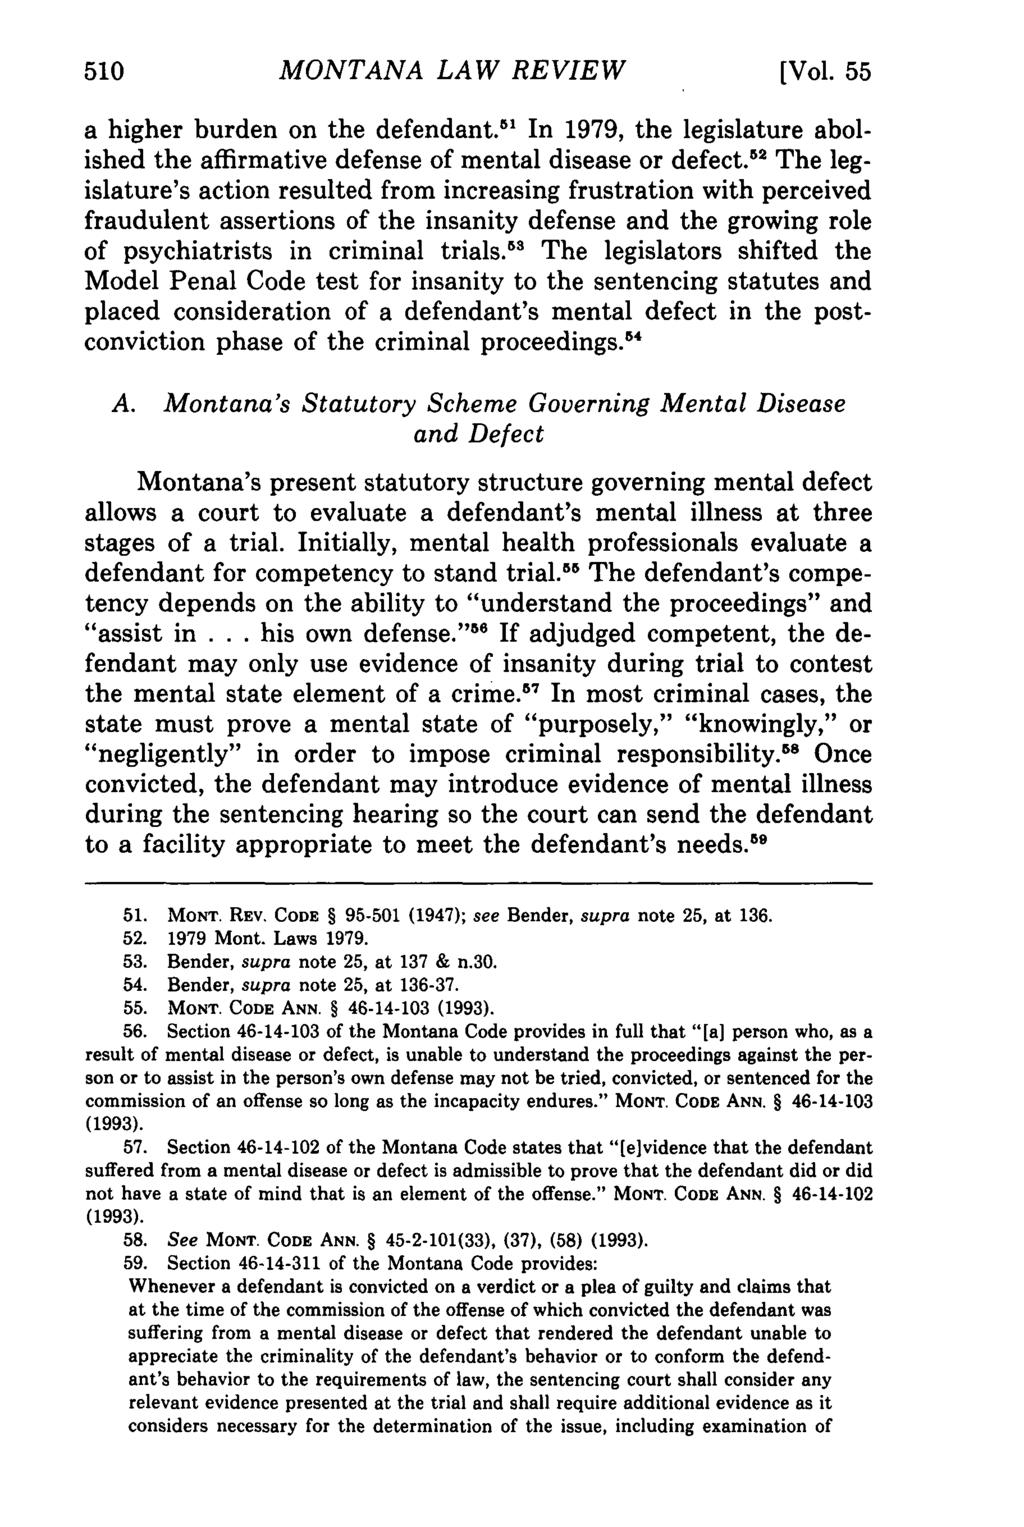 510 Montana MONTANA Law Review, Vol. 55 [1994], Iss. 2, Art. 12 LAW REVIEW [Vol. 55 a higher burden on the defendant.